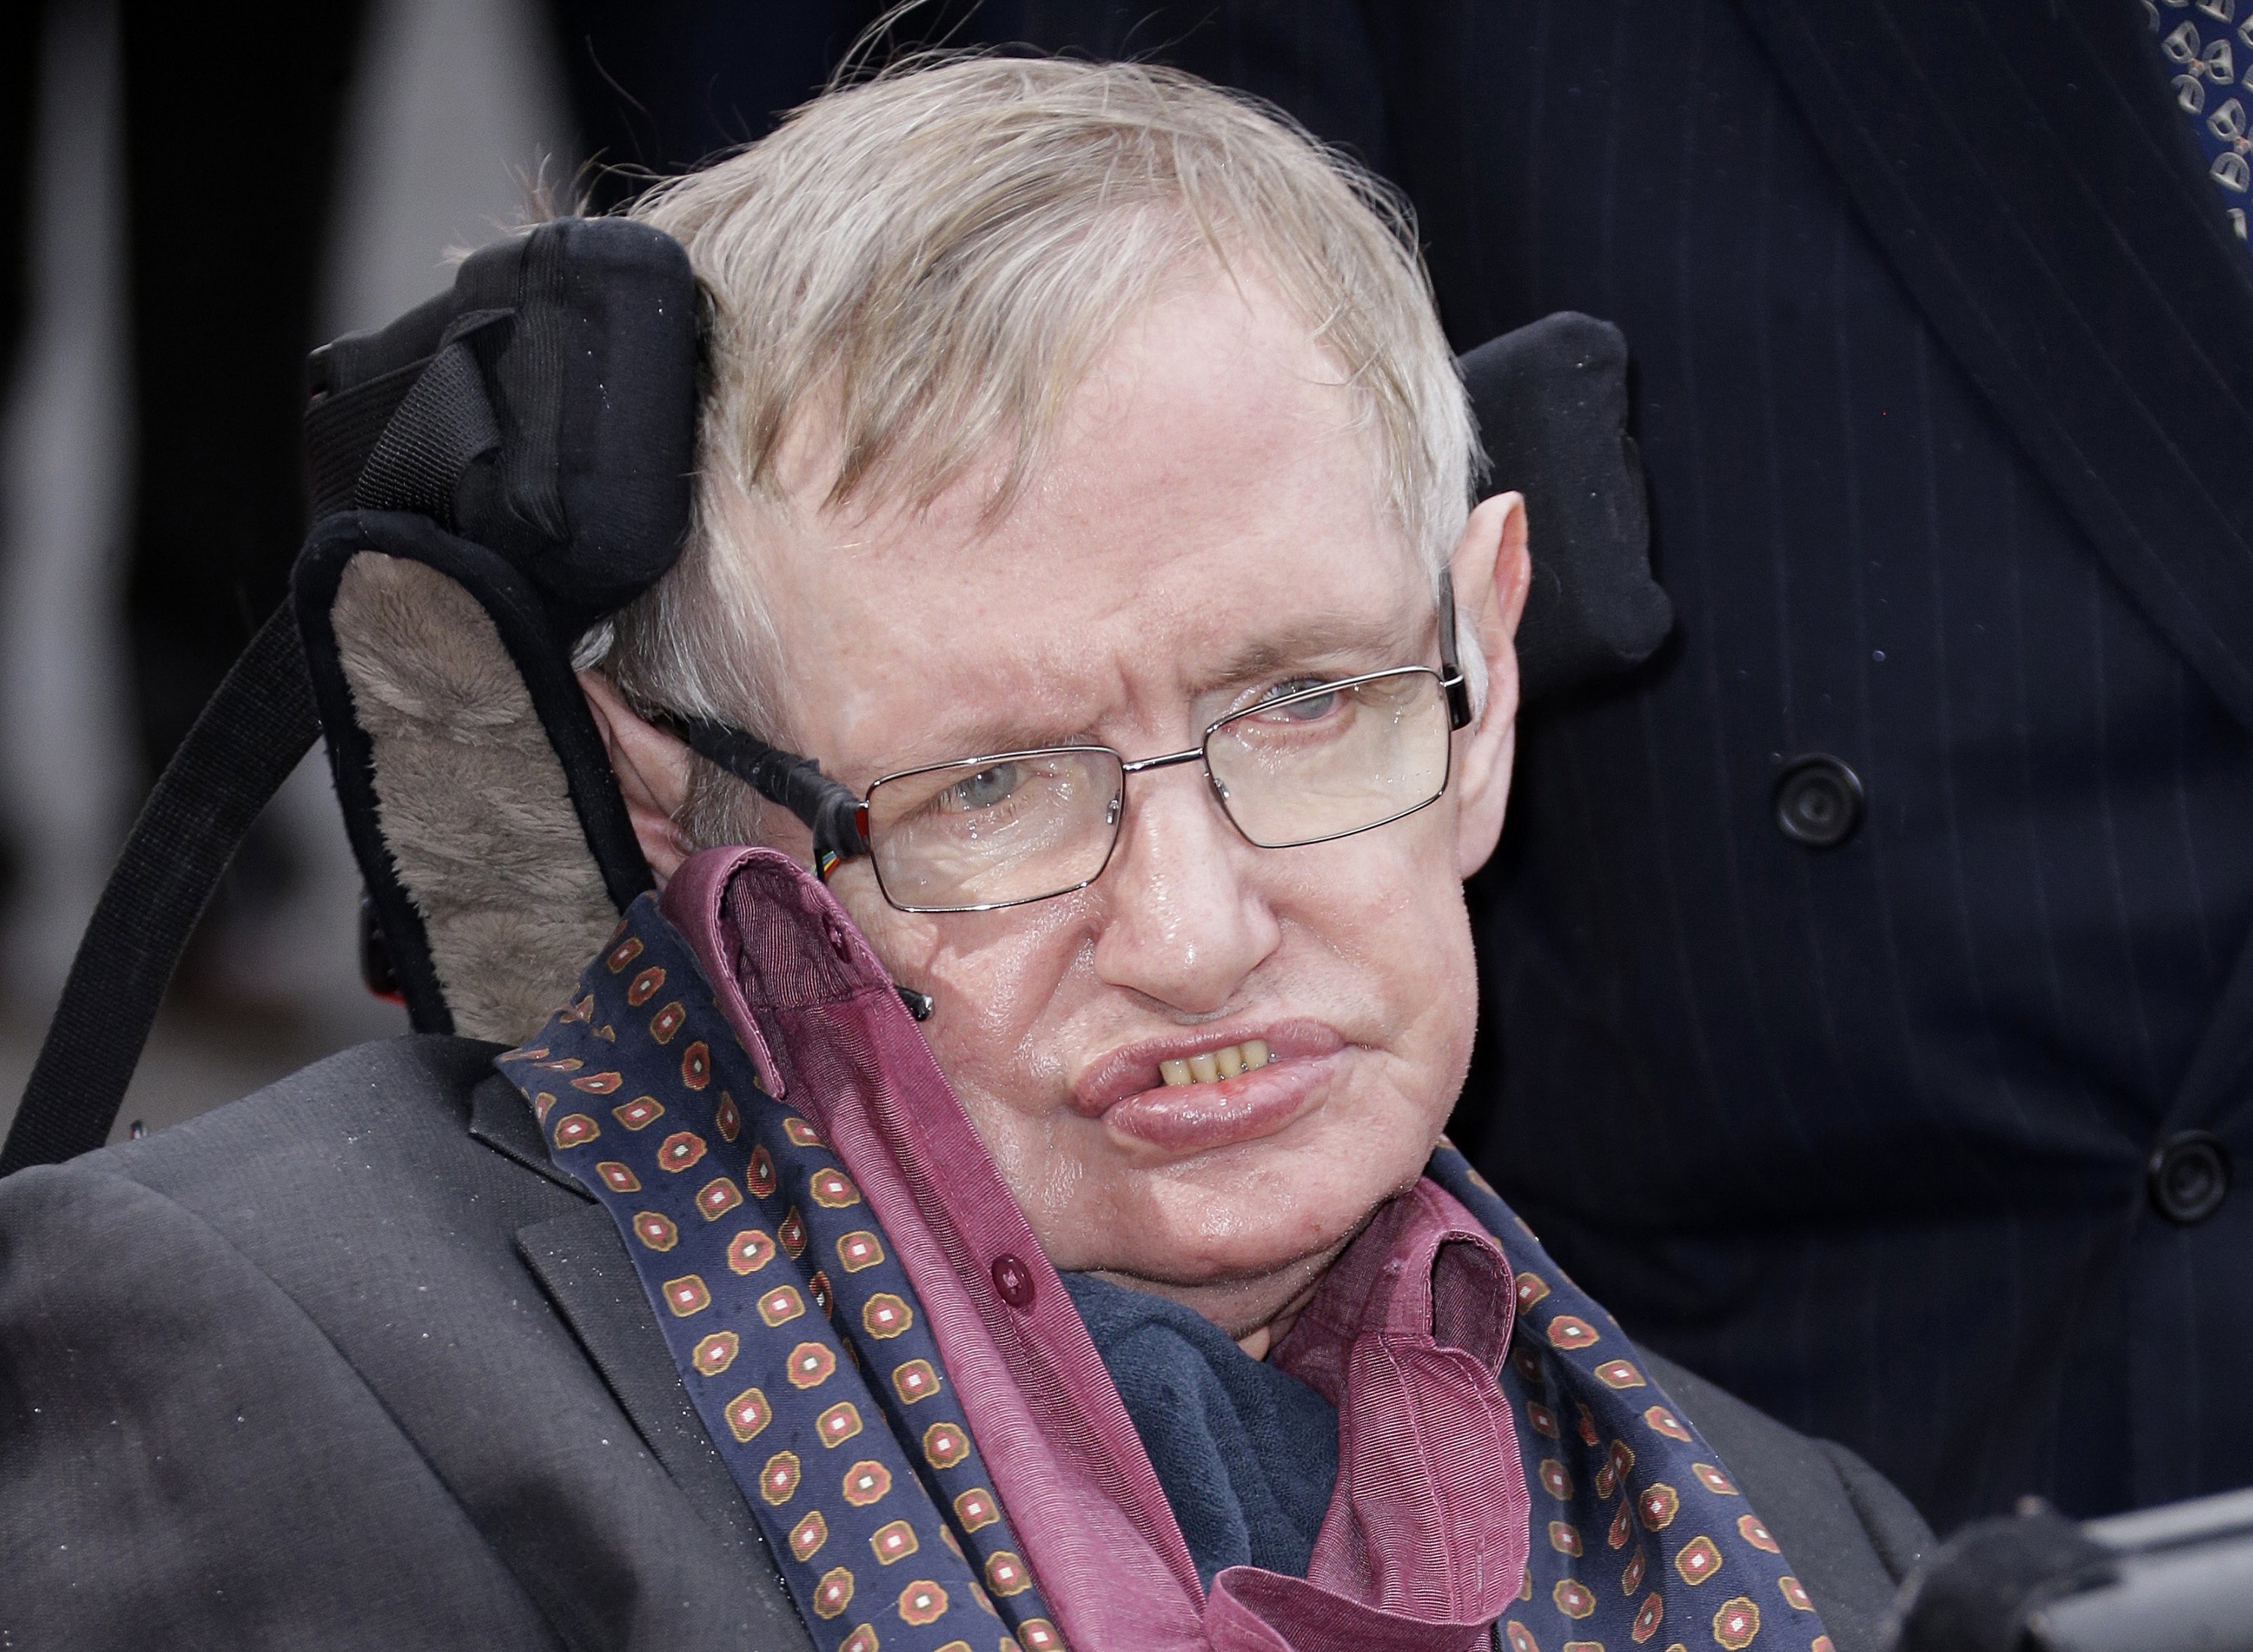 Stephen Hawking left 16.3 million pounds in thumbprint-signed will